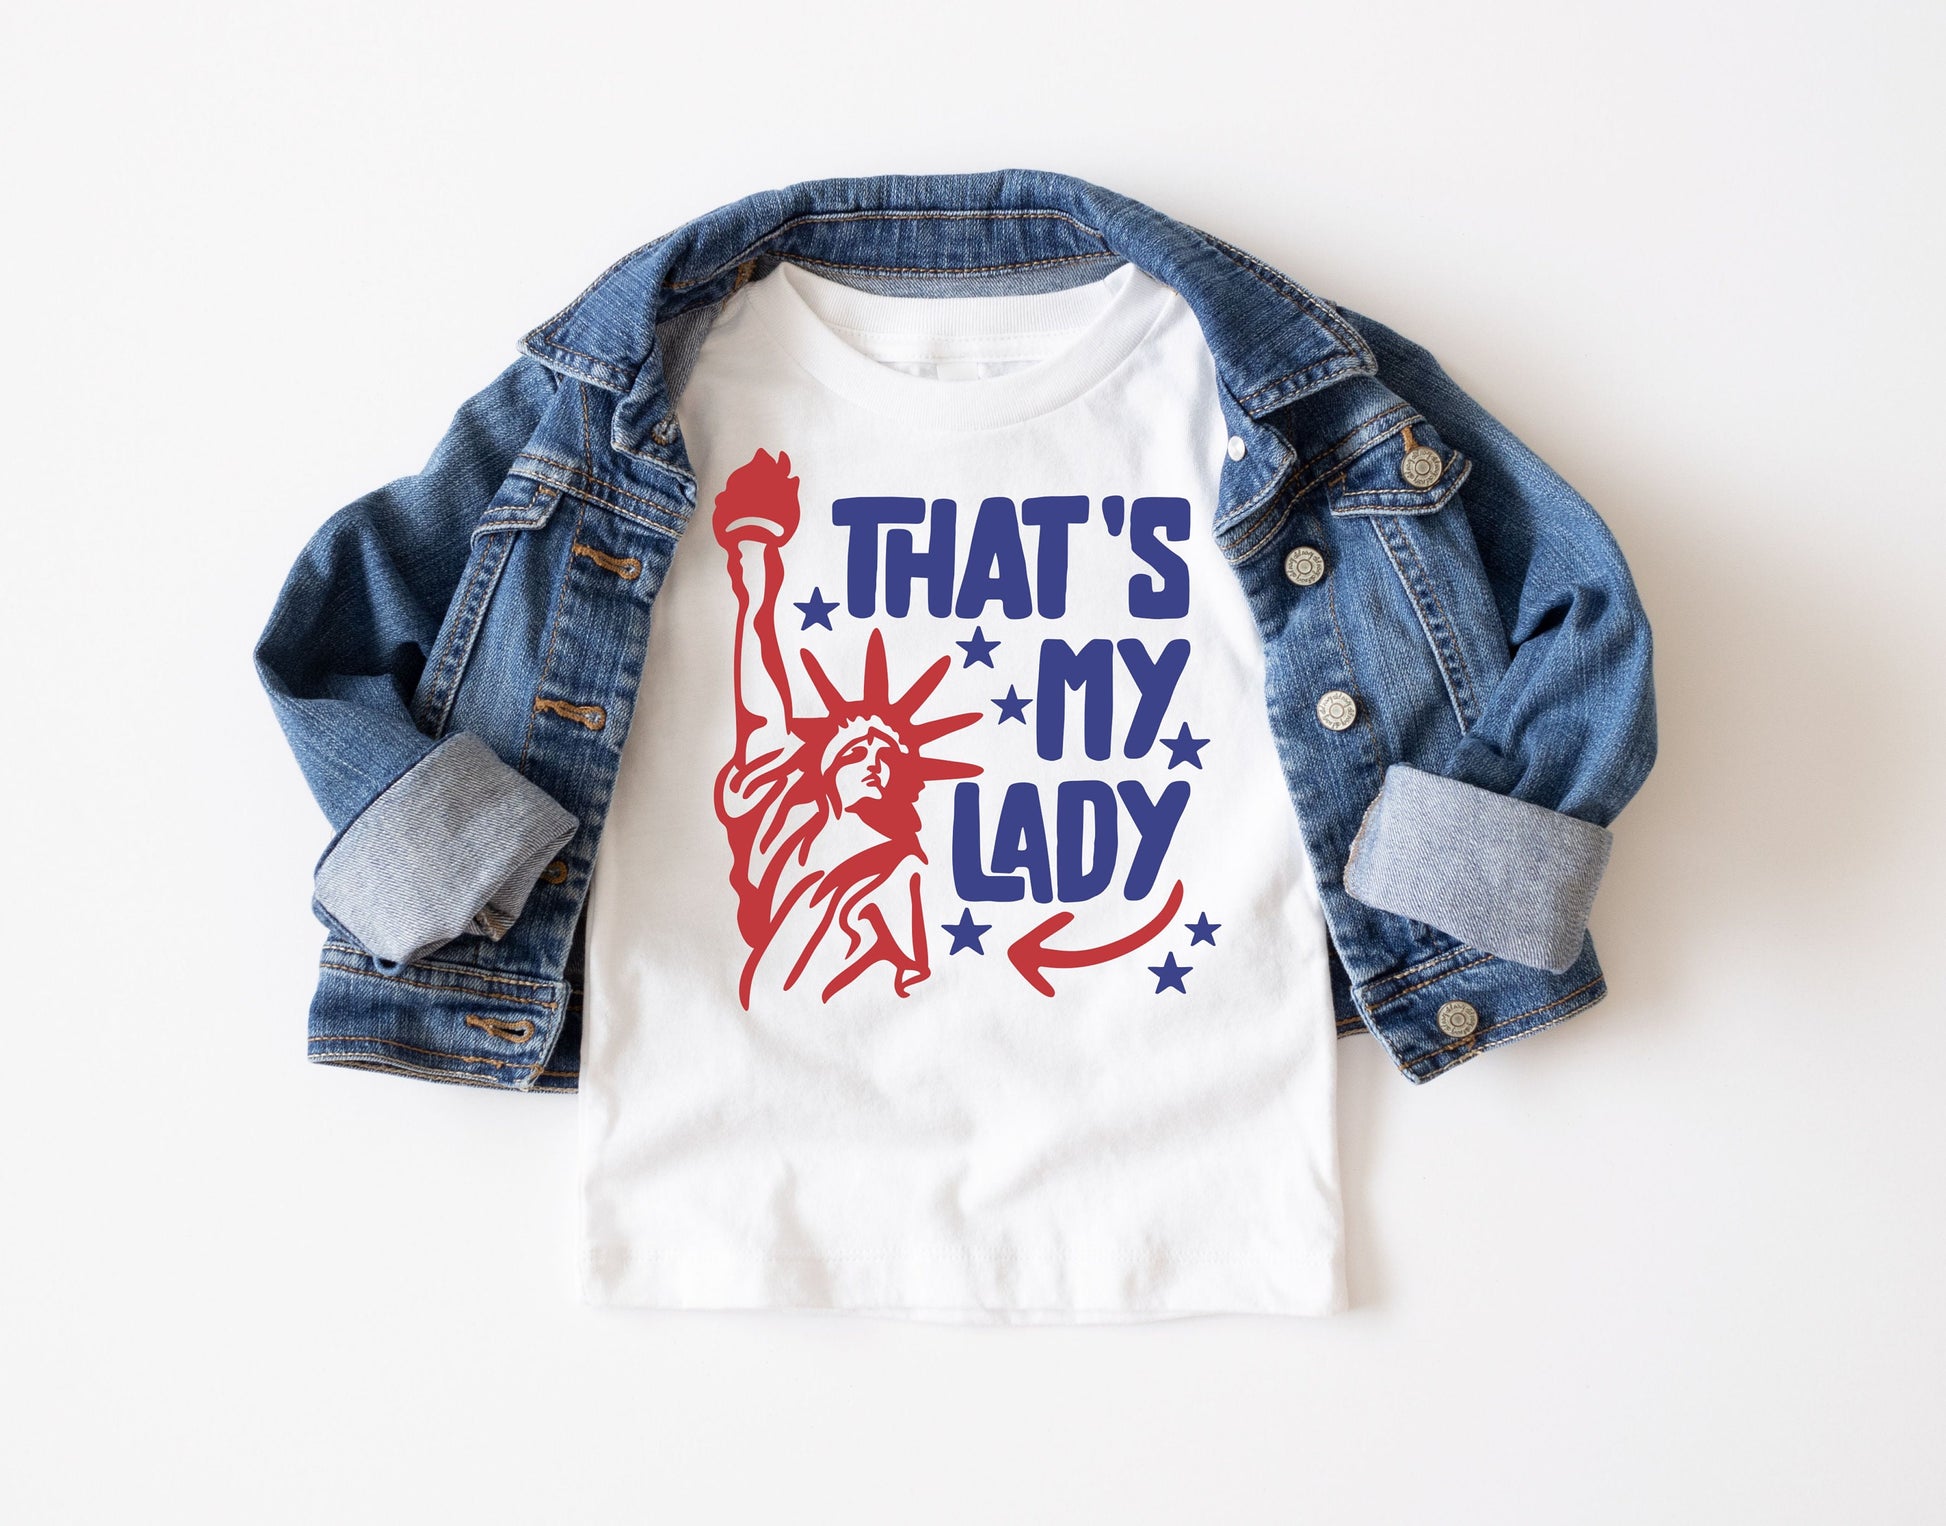 That's My Lady Statue of Liberty Boys Shirt - Toddler 4th of July Shirt - Fourth of July Kids Shirt